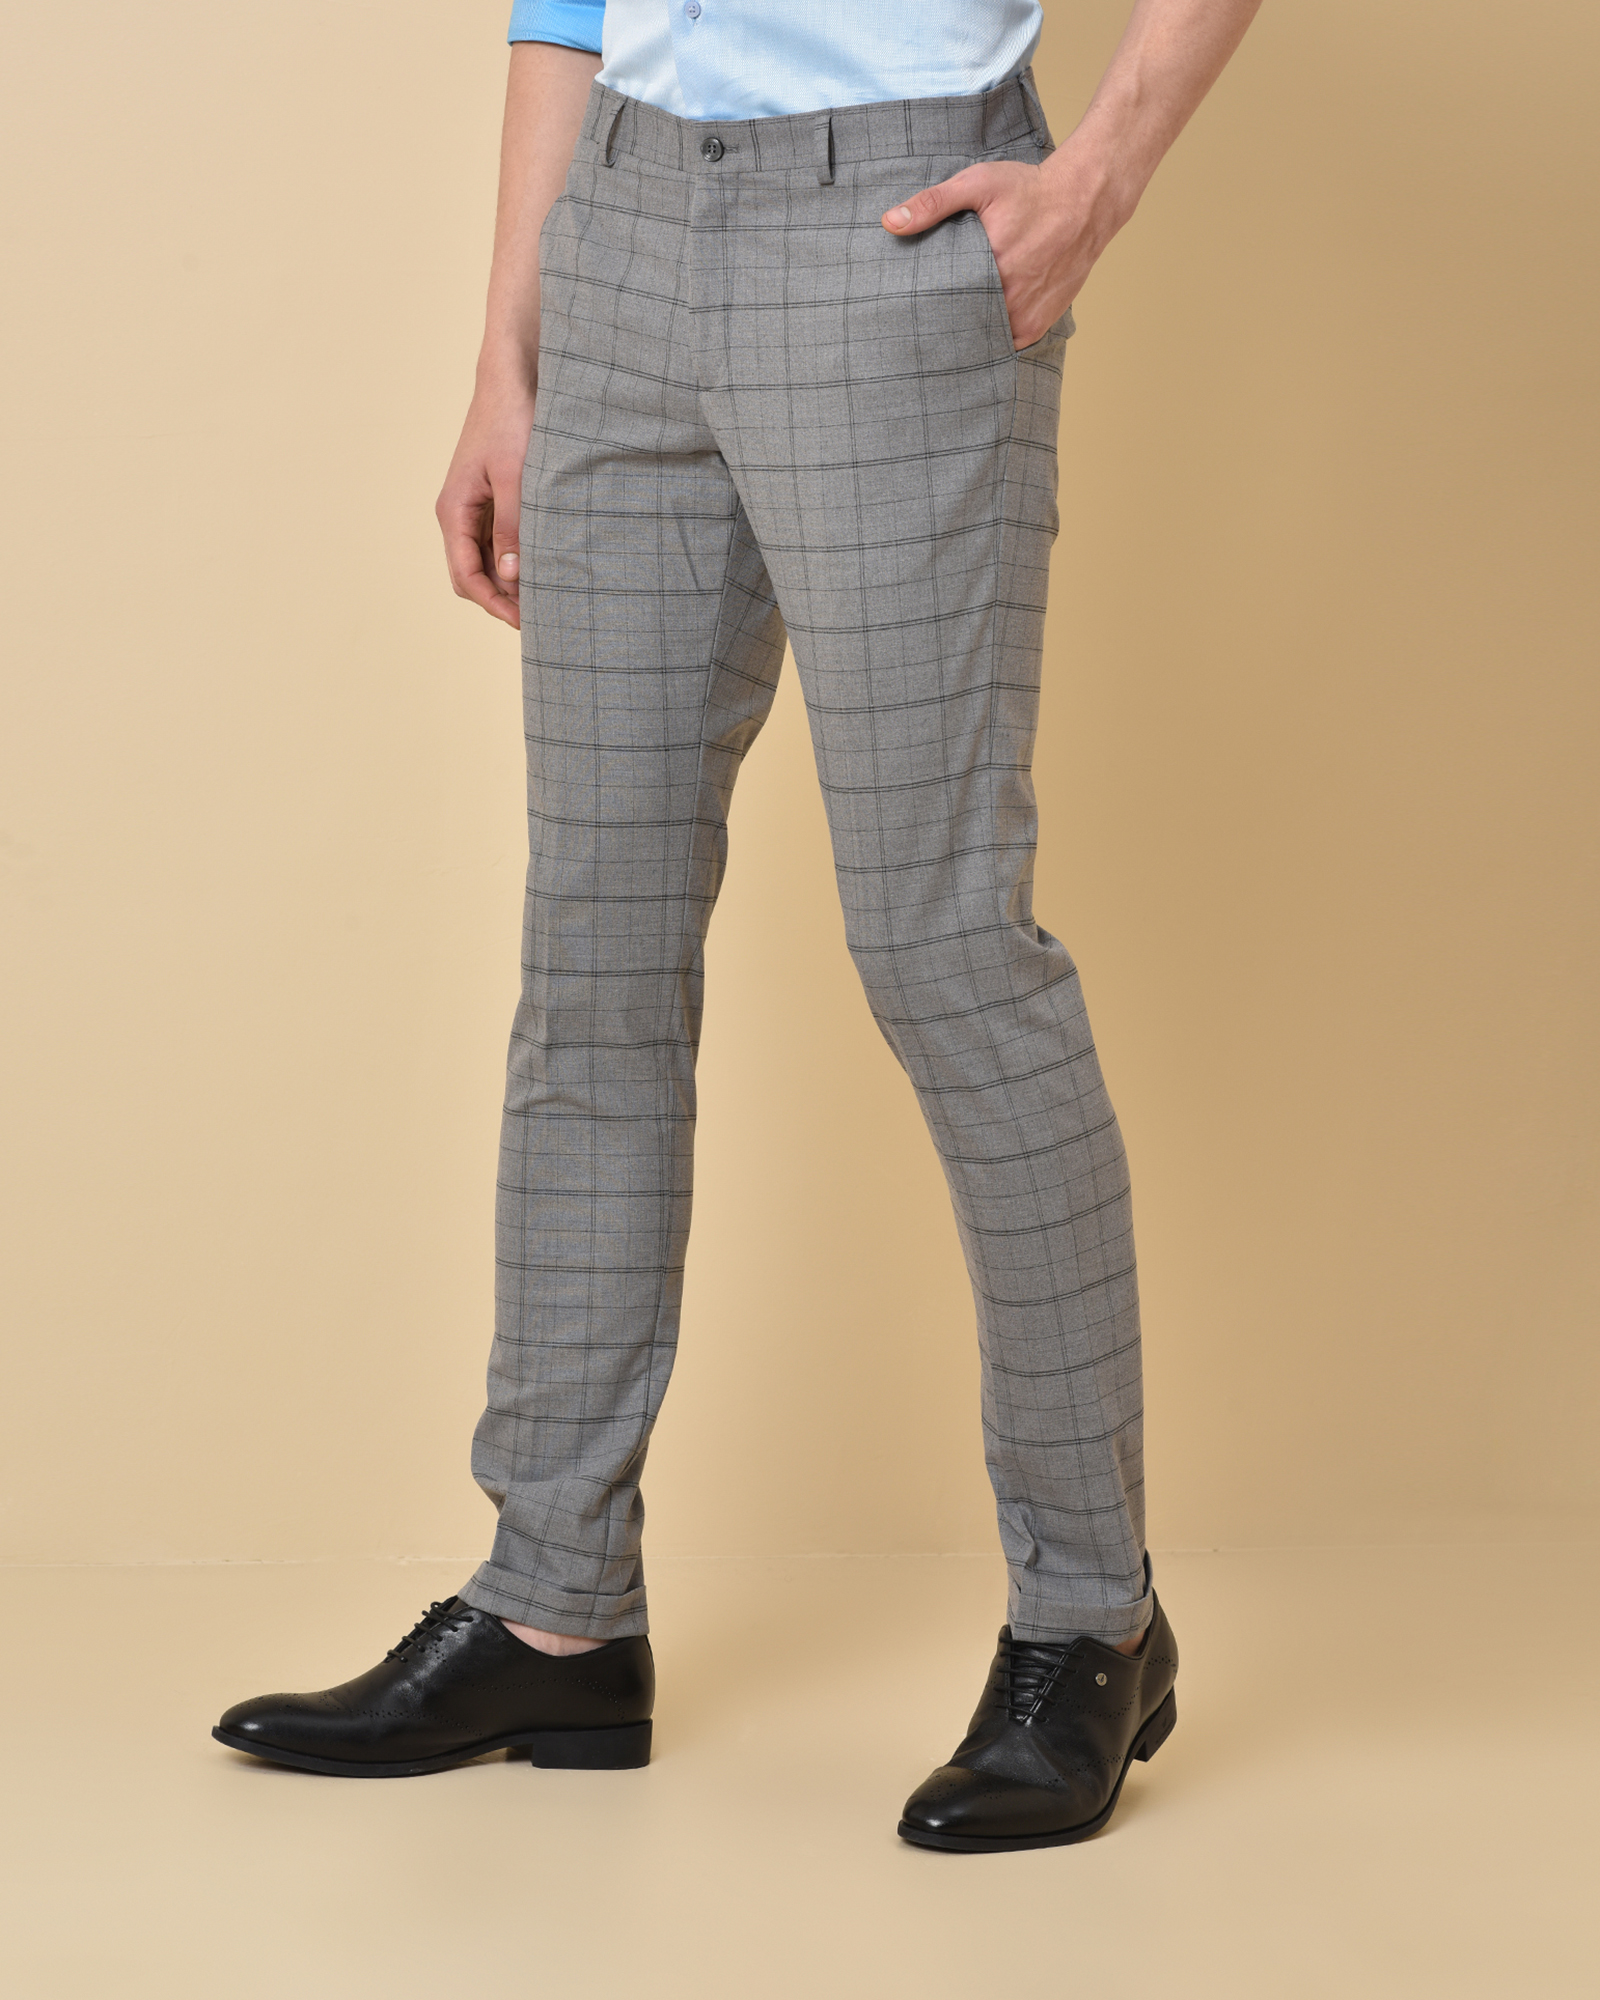 Fashionable checkered Formal Super slim fit Trouser